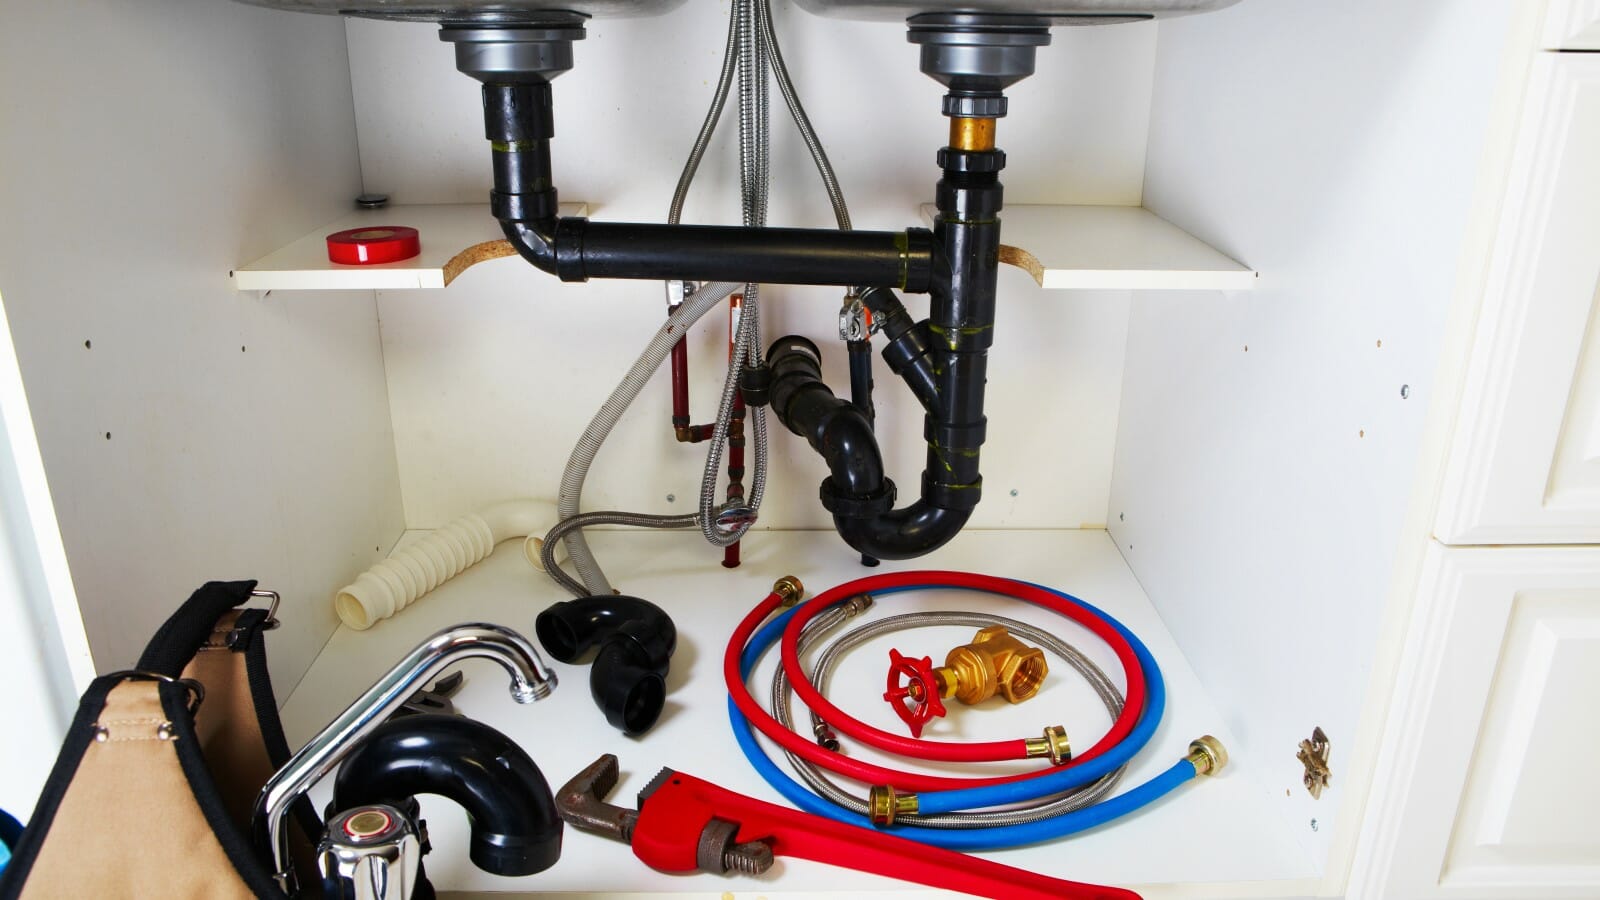 How smart technology is shaping plumbing and heating